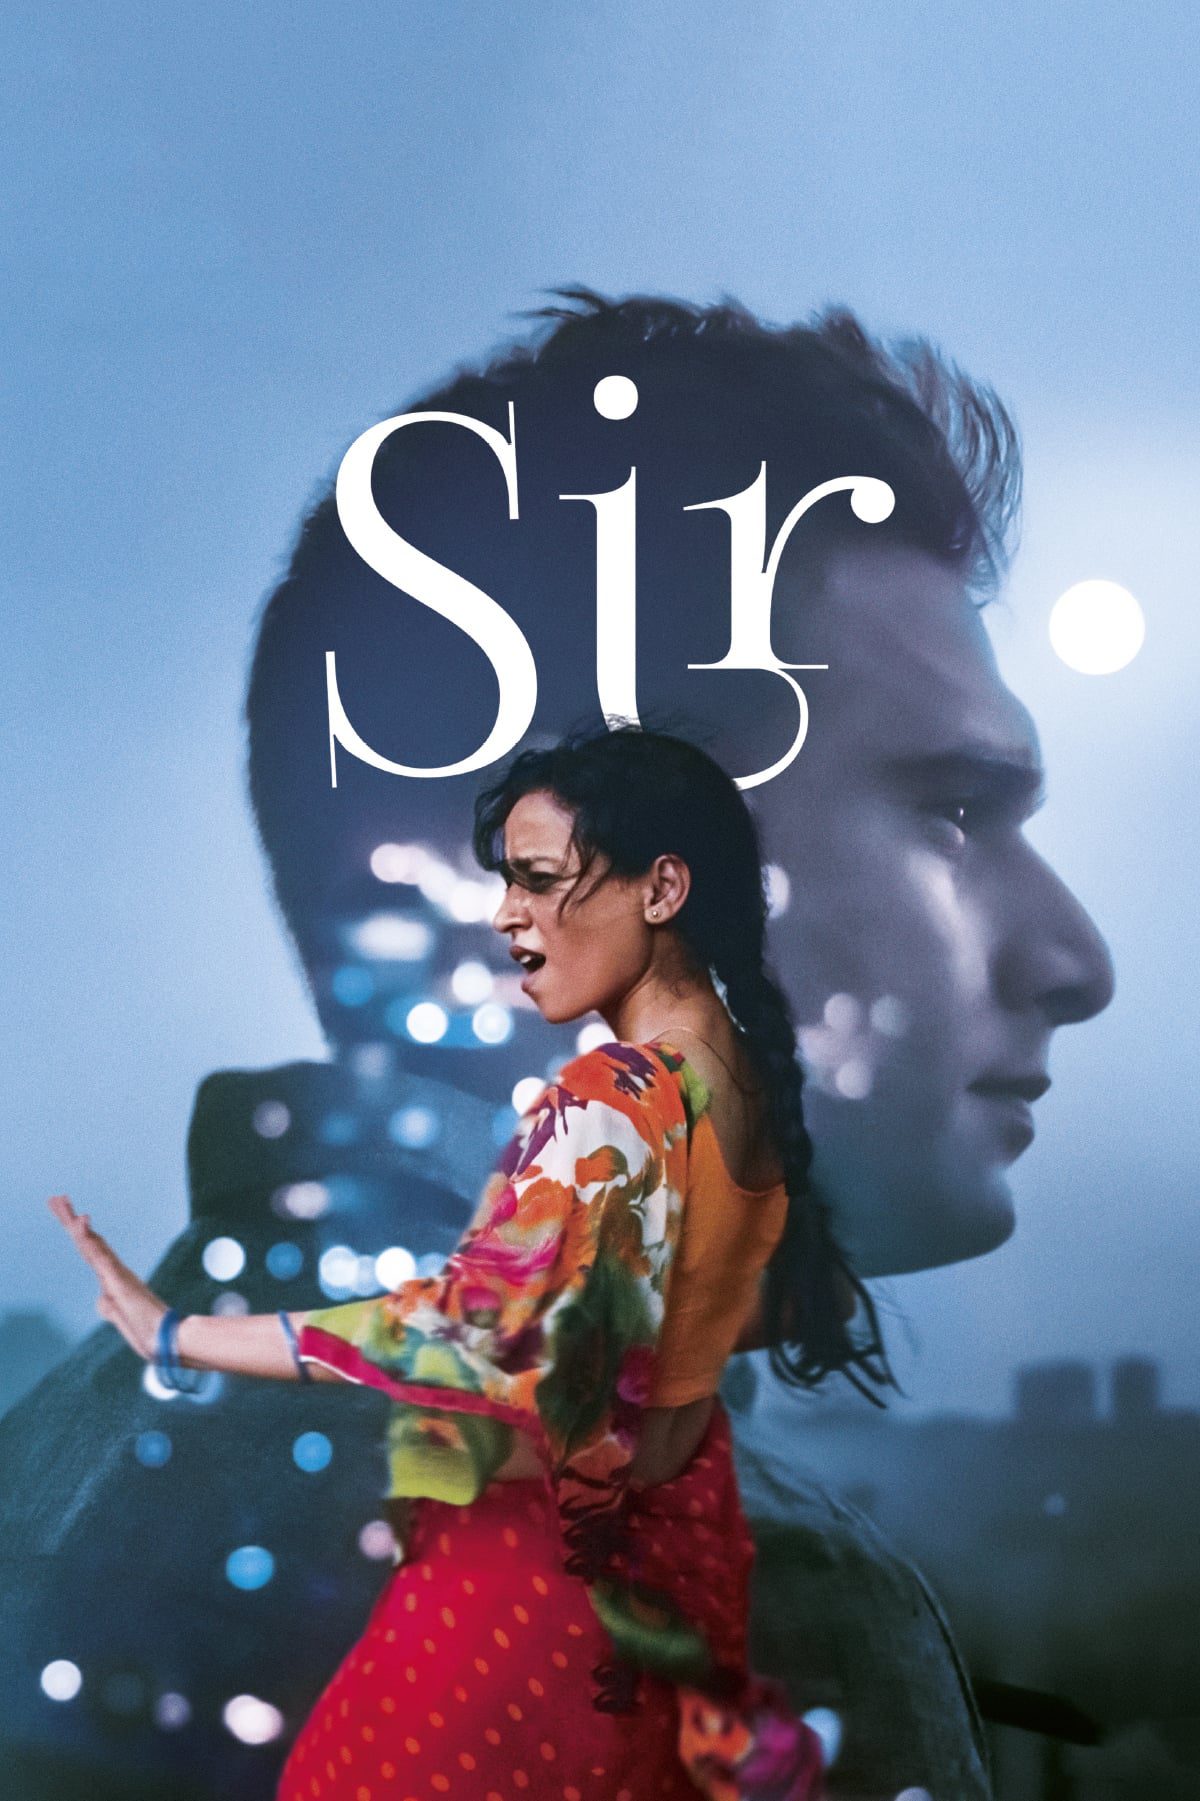 Poster for the movie "Sir"